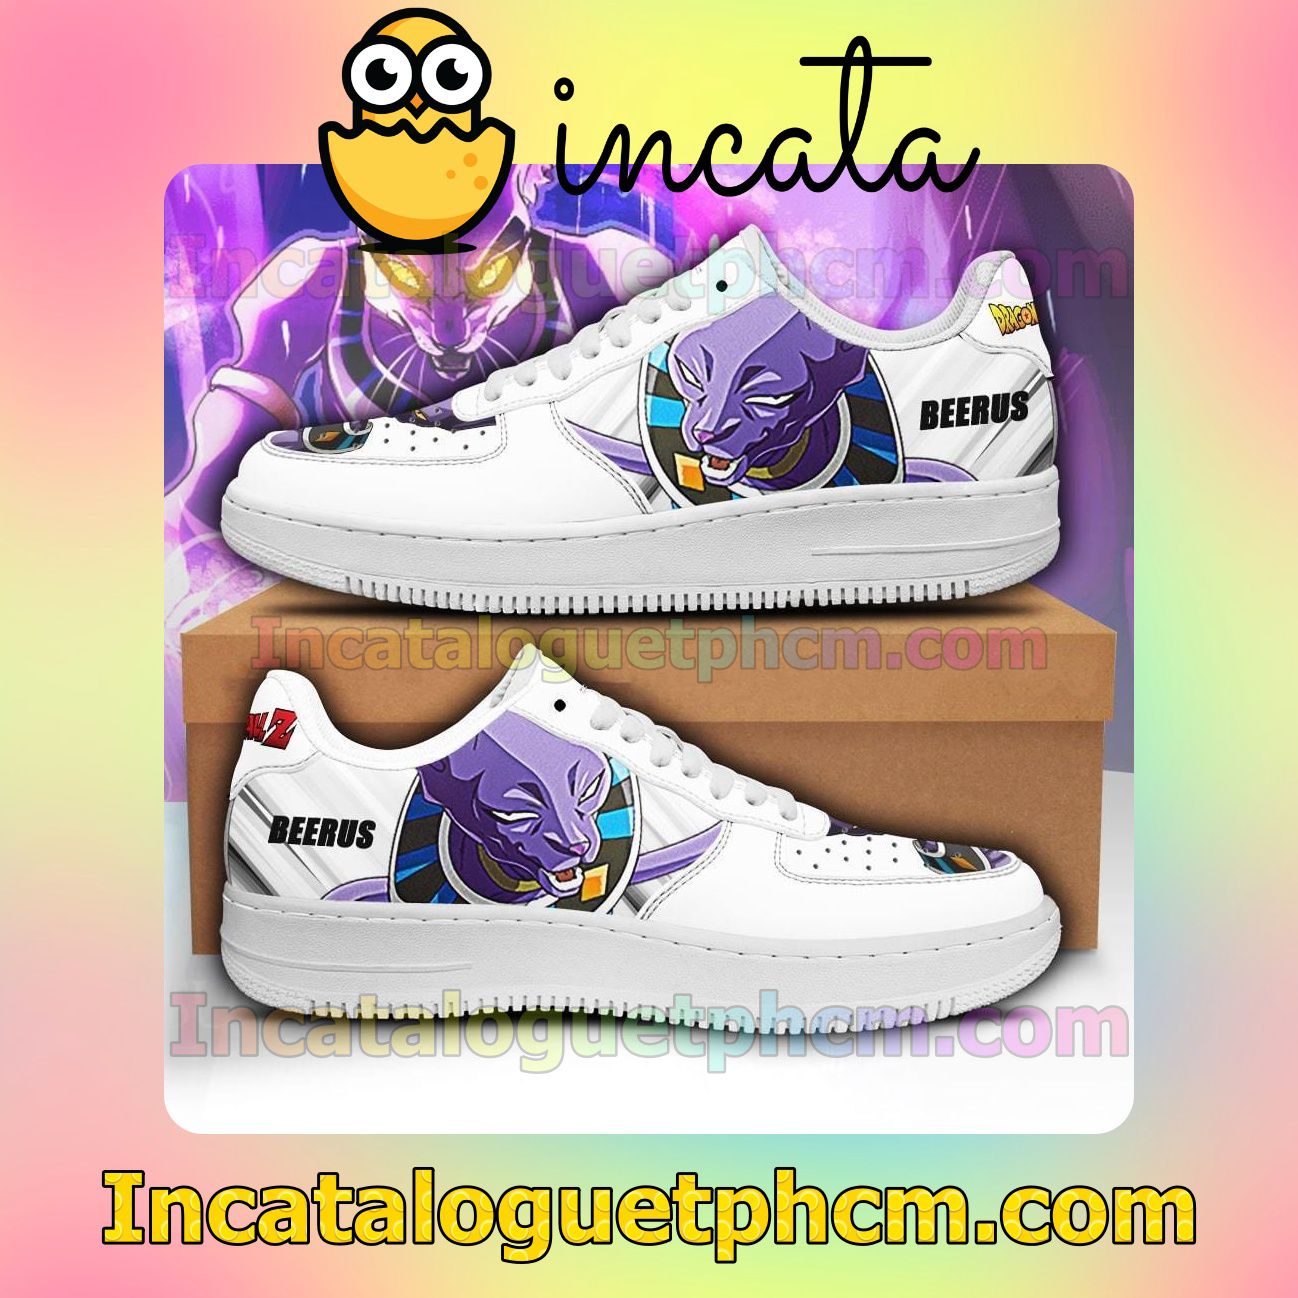 Beerus Dragon Ball Z Anime Nike Low Shoes Sneakers